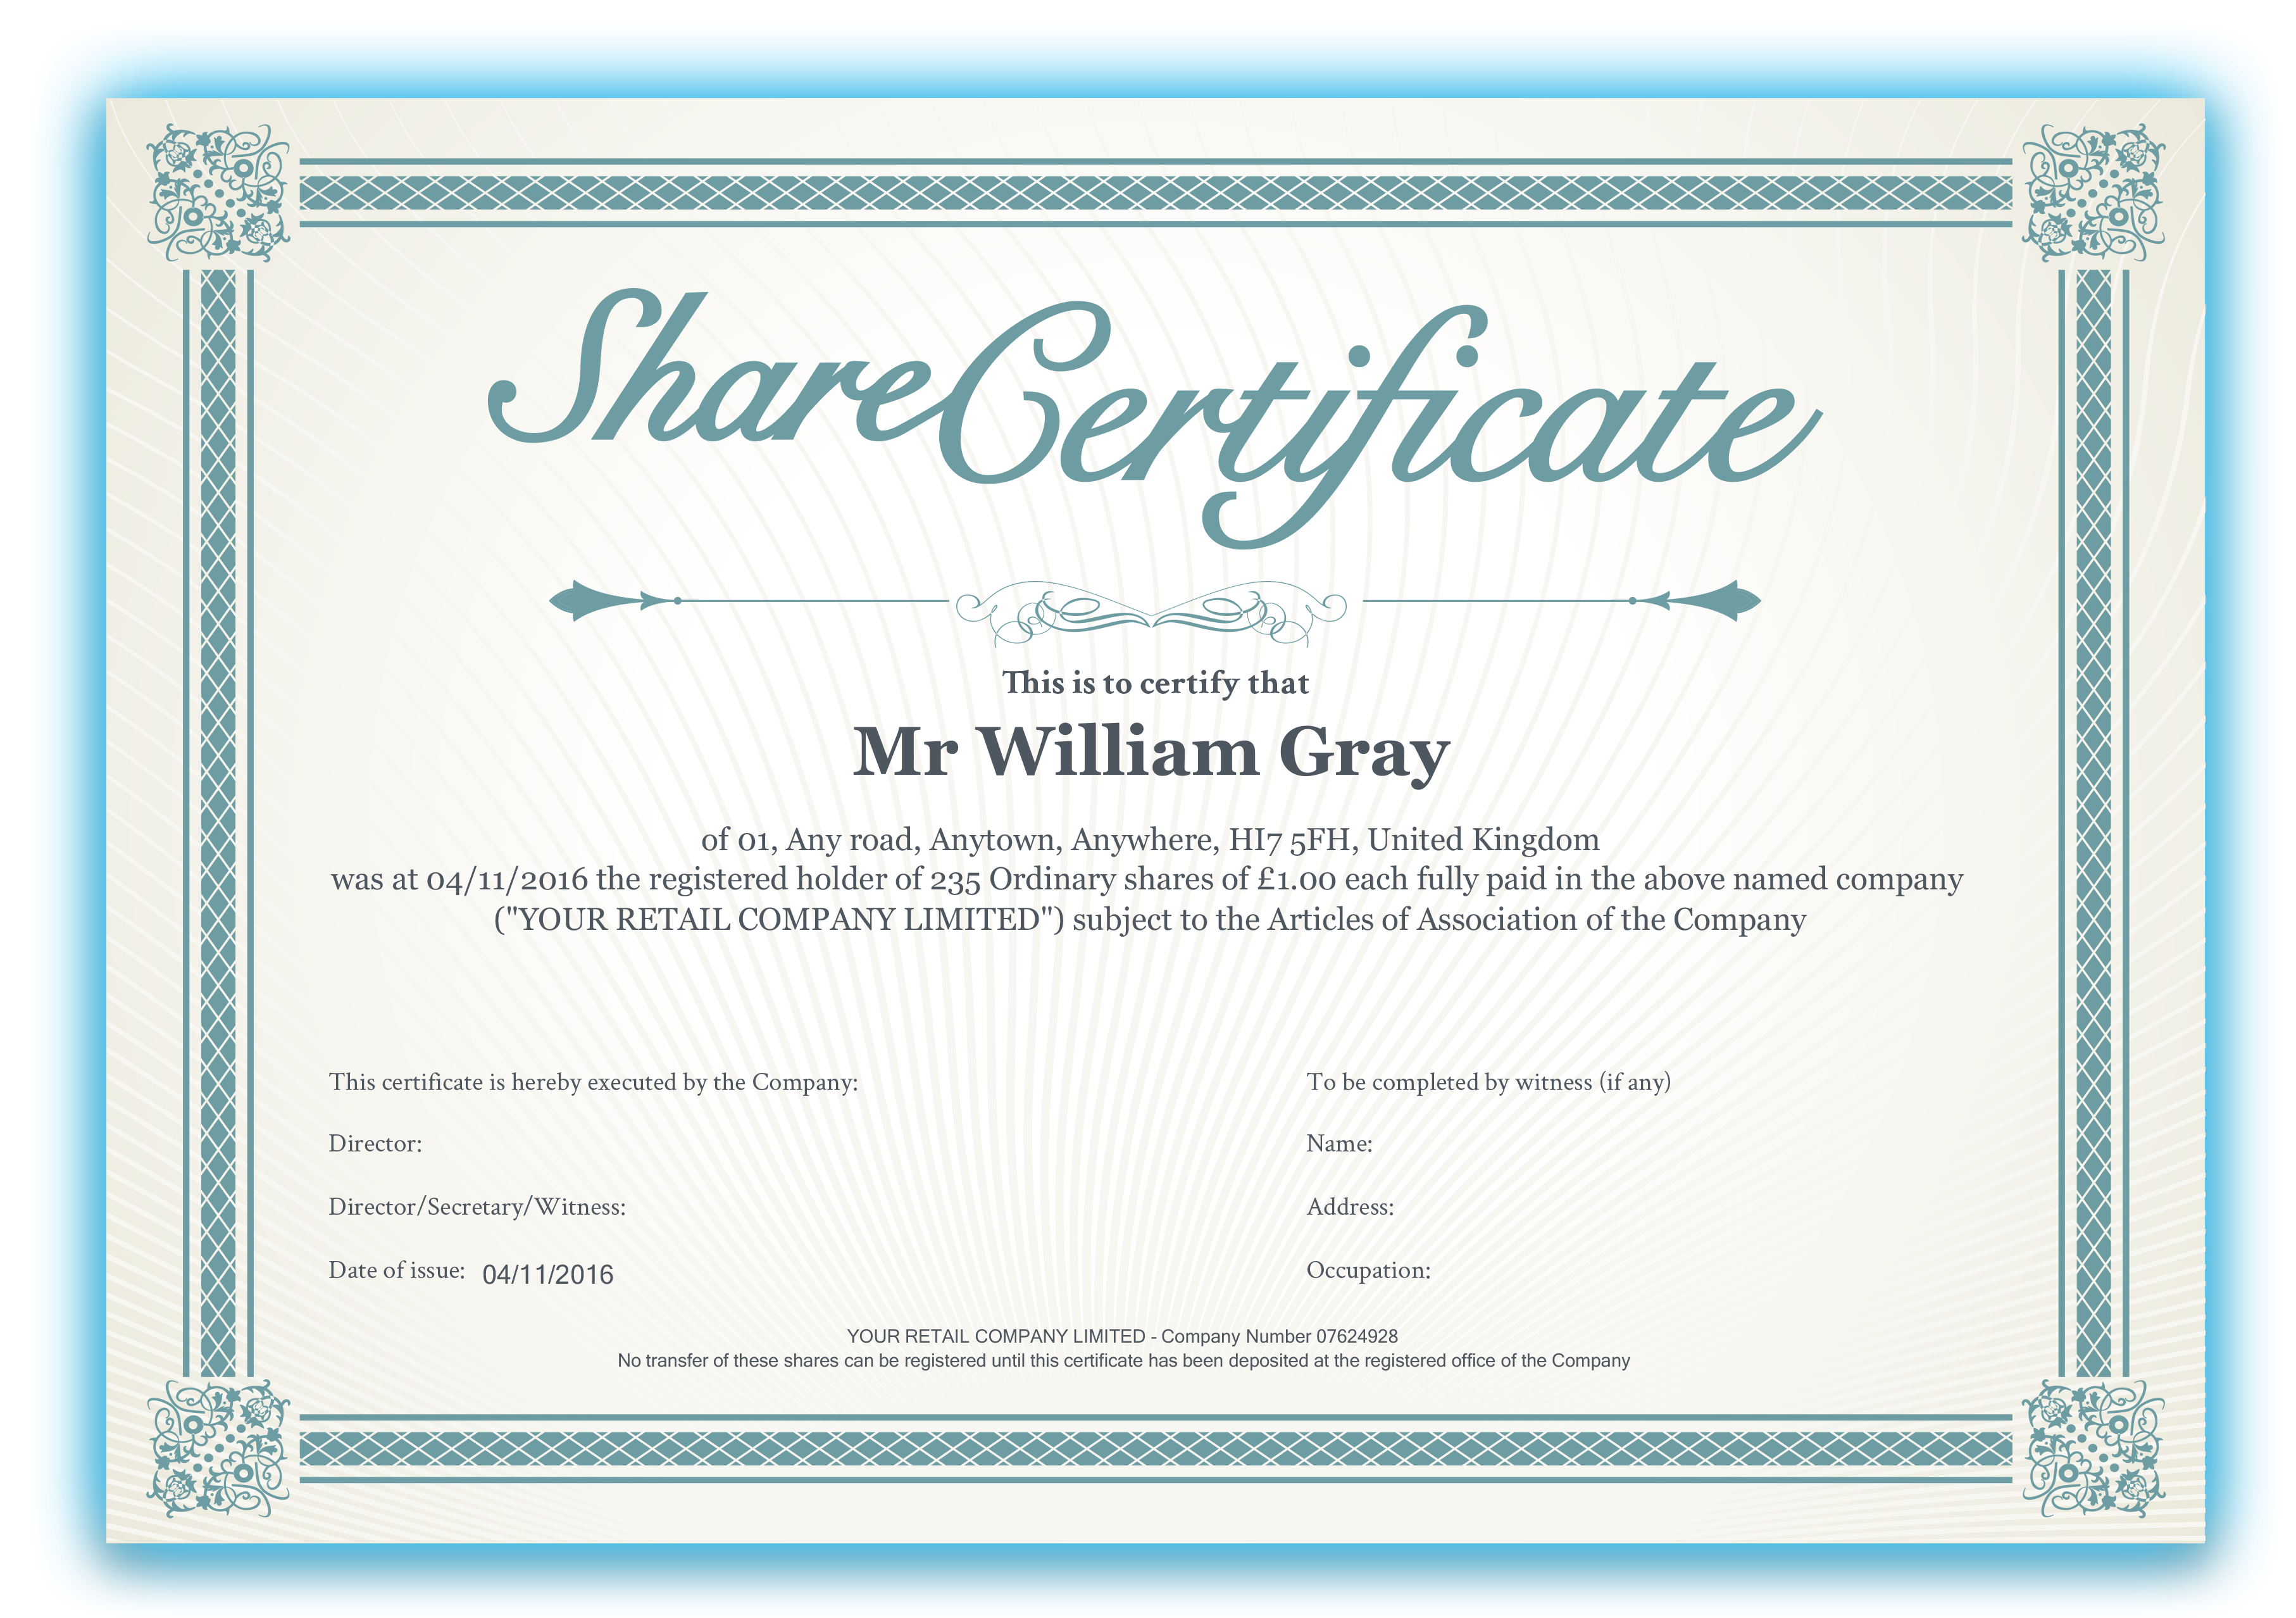 How Do I Add a Logo to the Share Certificate? : Inform Direct Support Throughout Template For Share Certificate